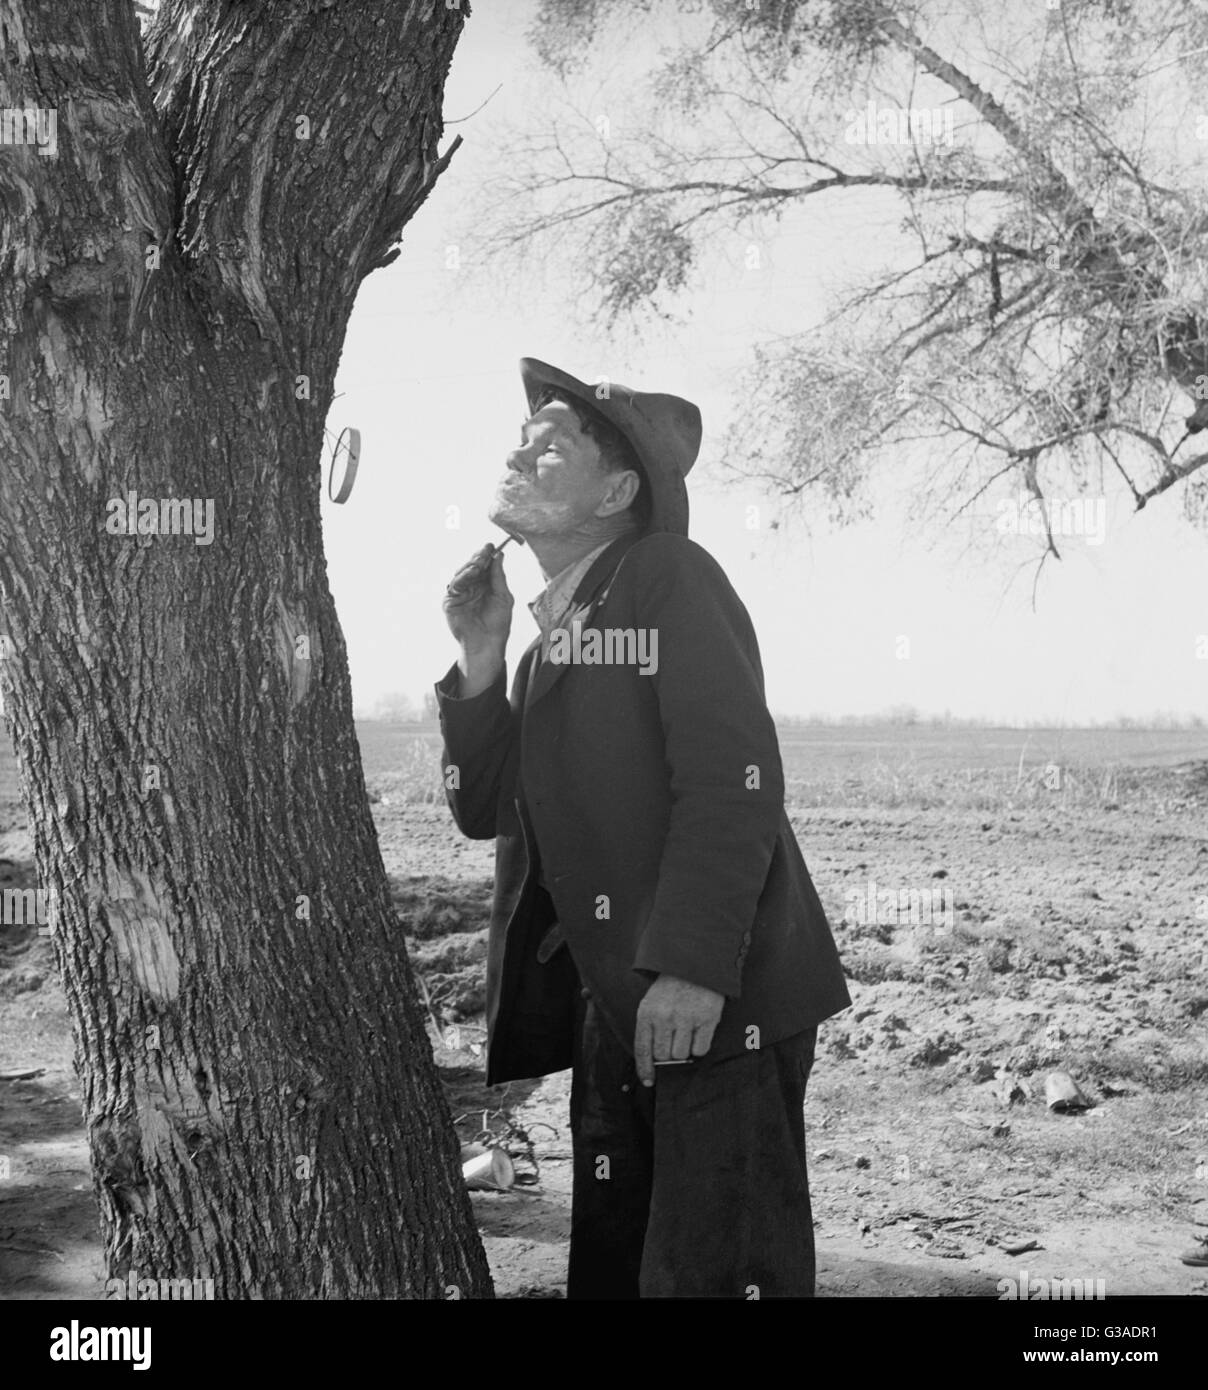 On US 99 between Bakersfield and the Ridge, en route to San Diego. Migrant man shaving by roadside. See general caption 1. Date 1939 Feb. Stock Photo